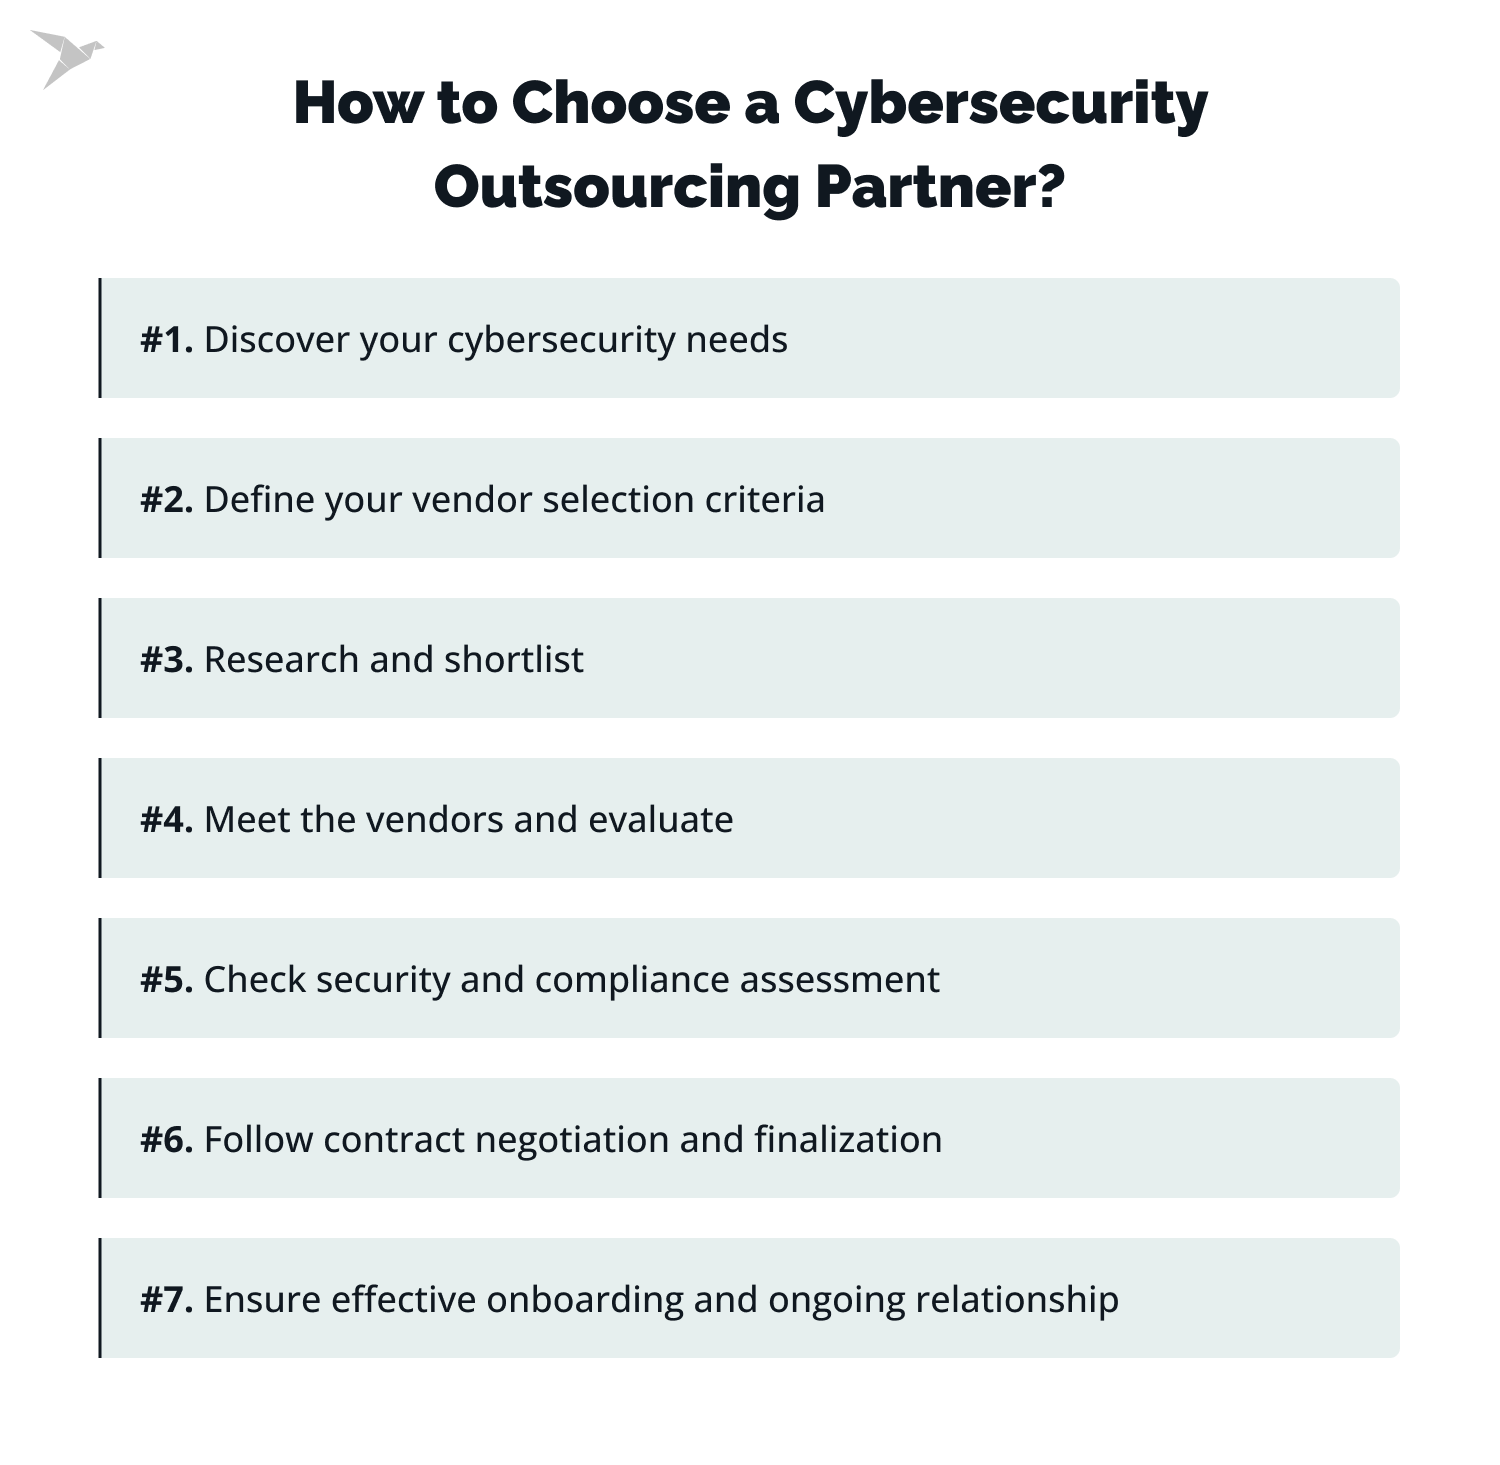 How to Choose a Cybersecurity Outsourcing Partner?